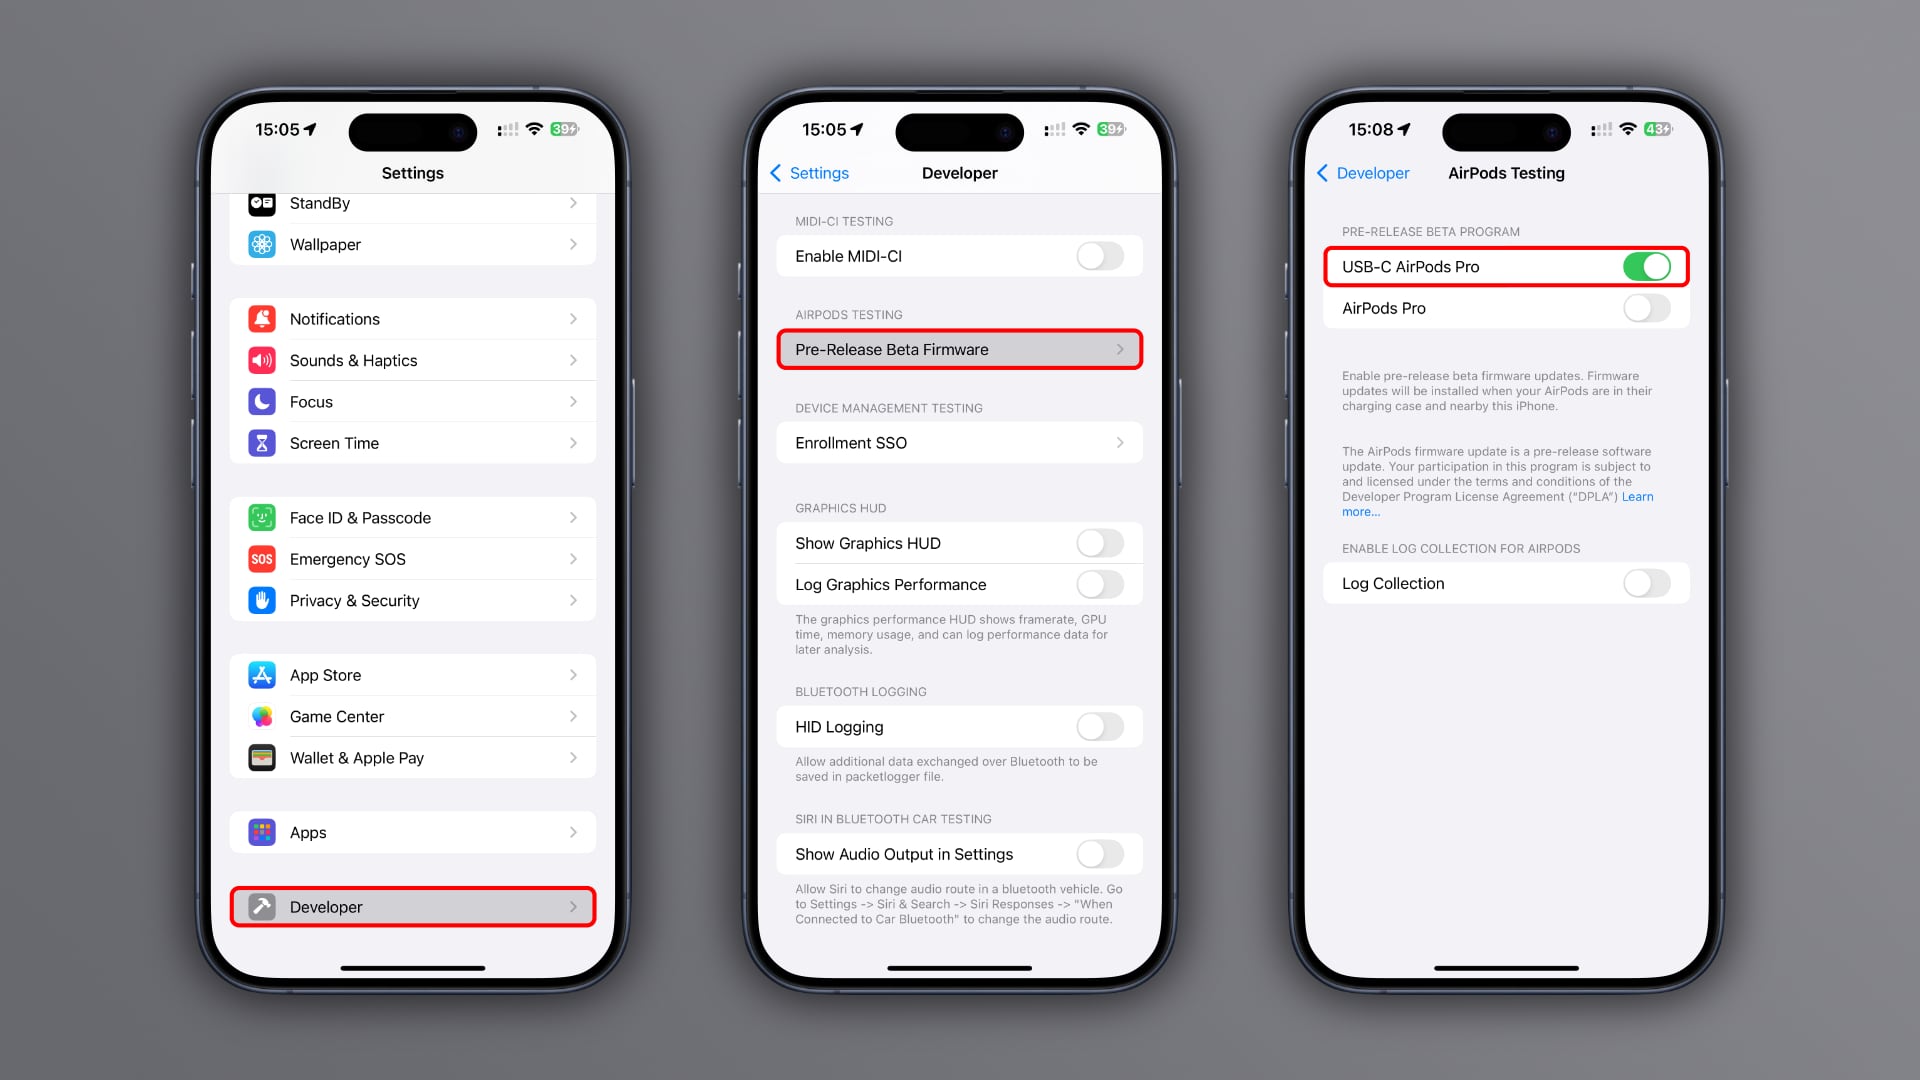 Selecting AirPods for beta firmware in the Developer menu of the iPhone's Settings app